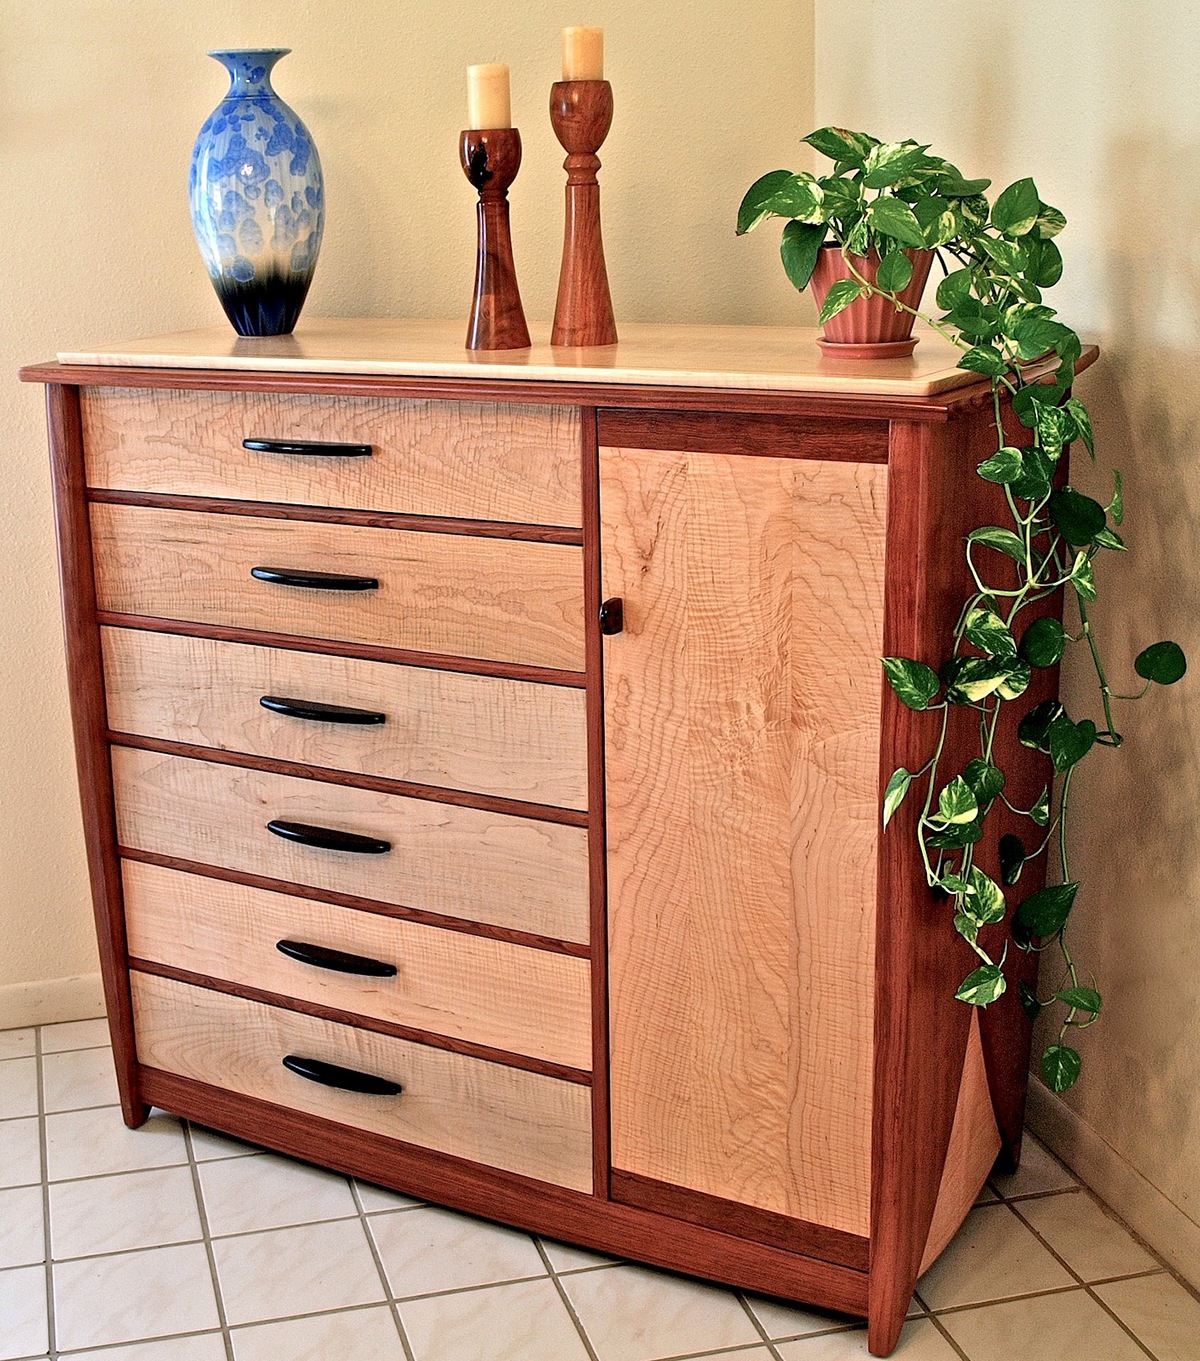 handmade furniture woodworking solid wood furniture bubinga curly maple dresser chest of drawers dovetails wood furniture casework cabinet